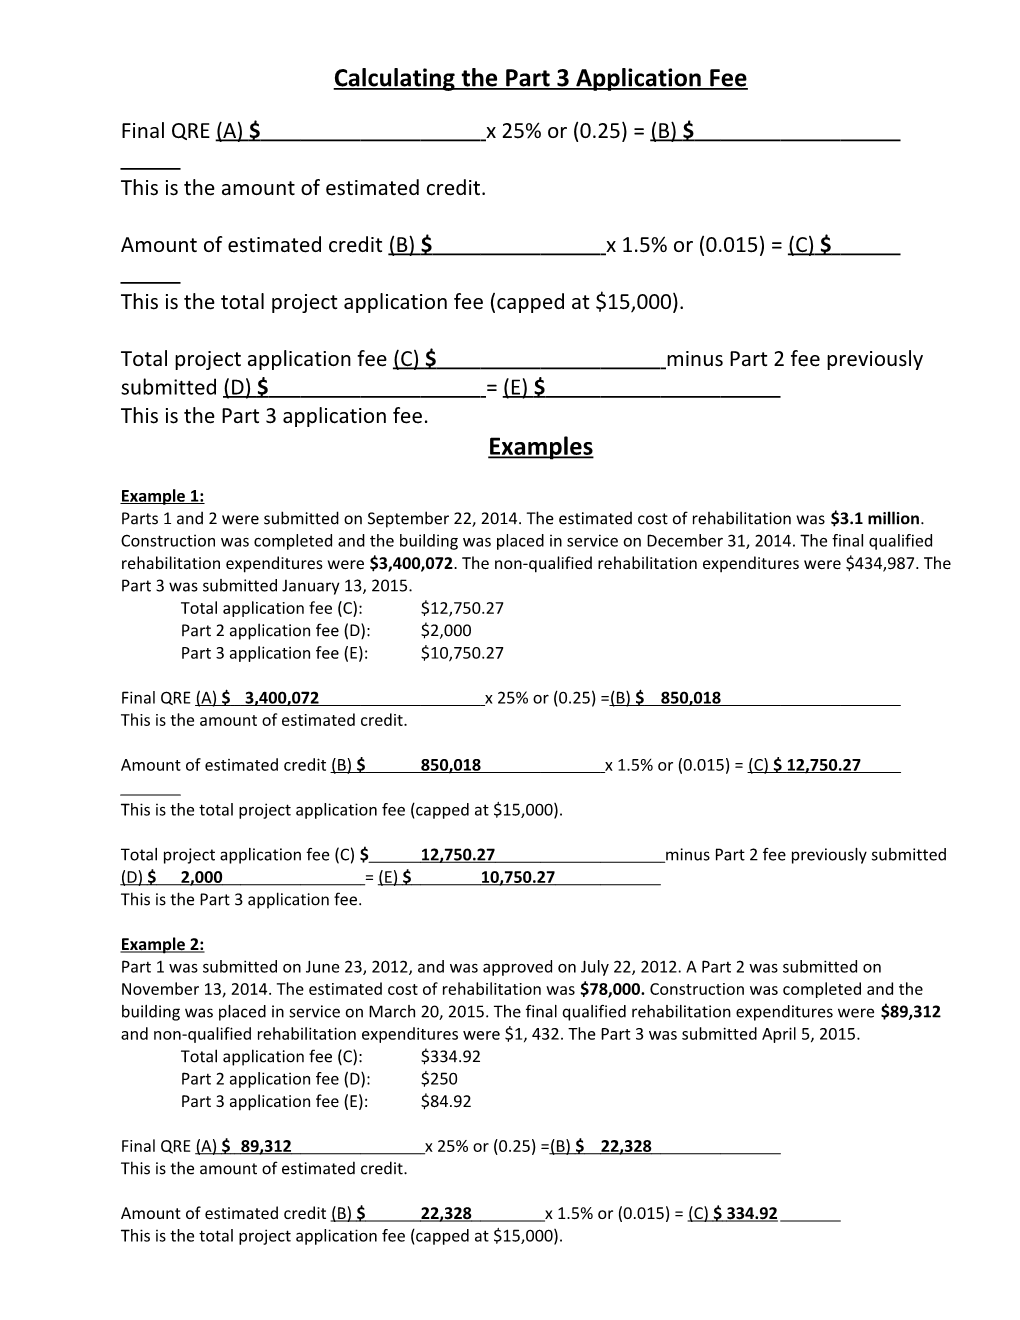 State Commercial Tax Credit Application Fees